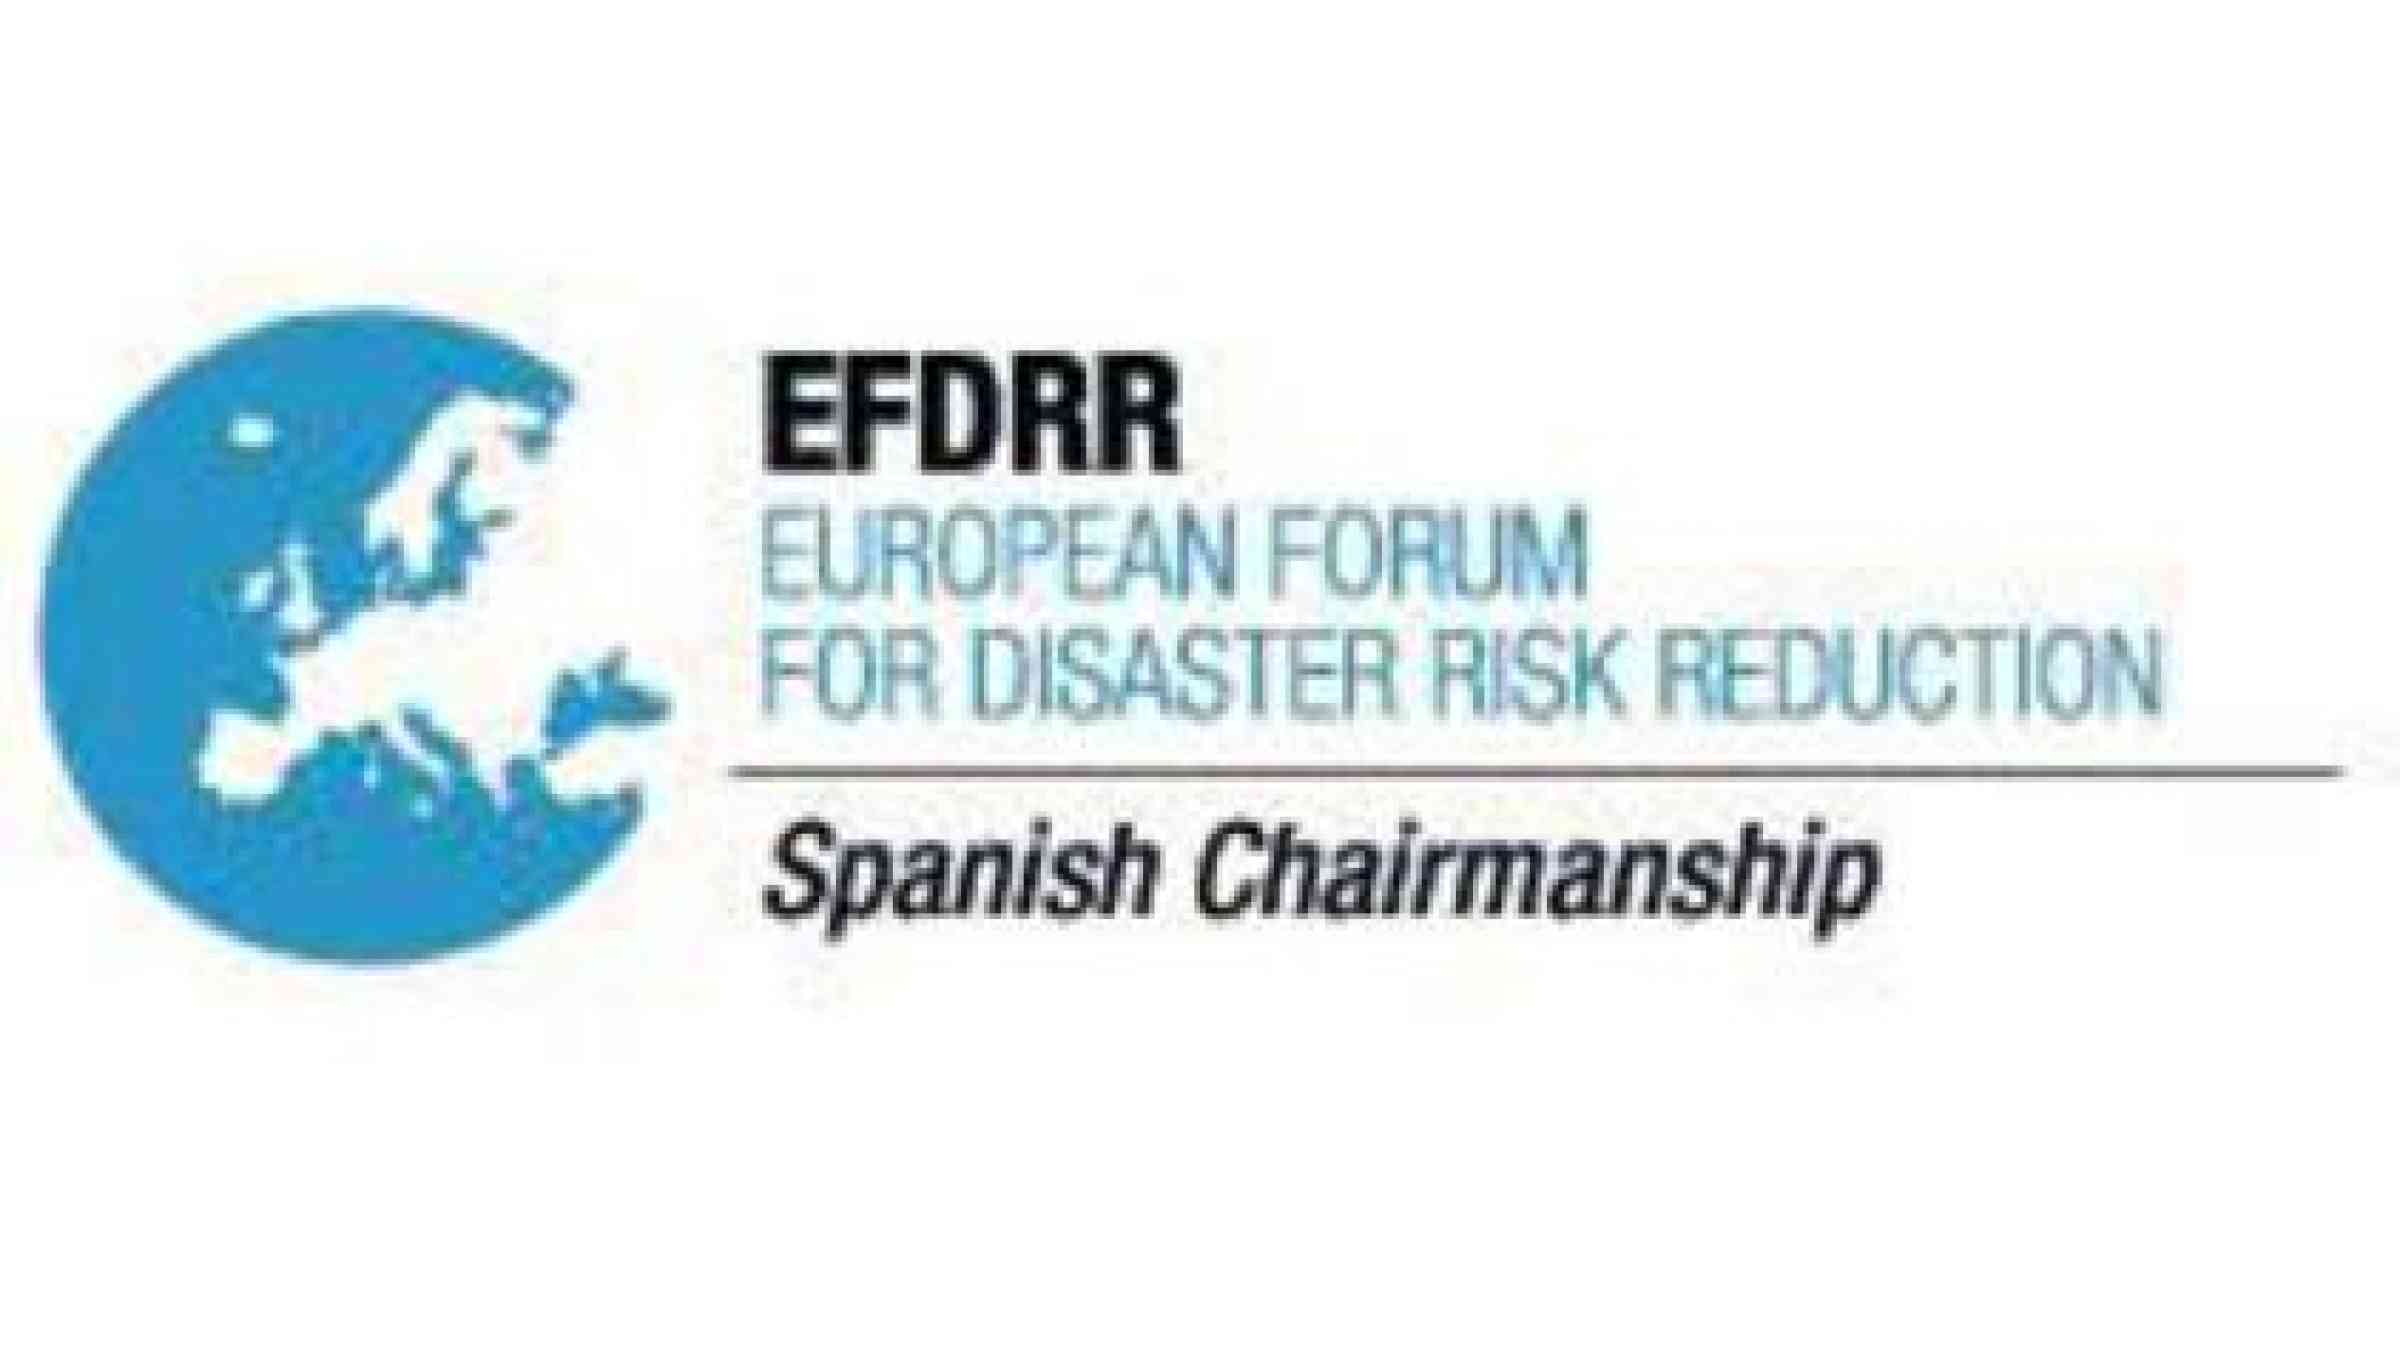 The European Forum for Disaster Risk Reduction (EFDRR) is intended to serve as the forum for exchanging information and knowledge, coordinating efforts throughout the Europe region and for providing advocacy for effective action to reduce disasters.